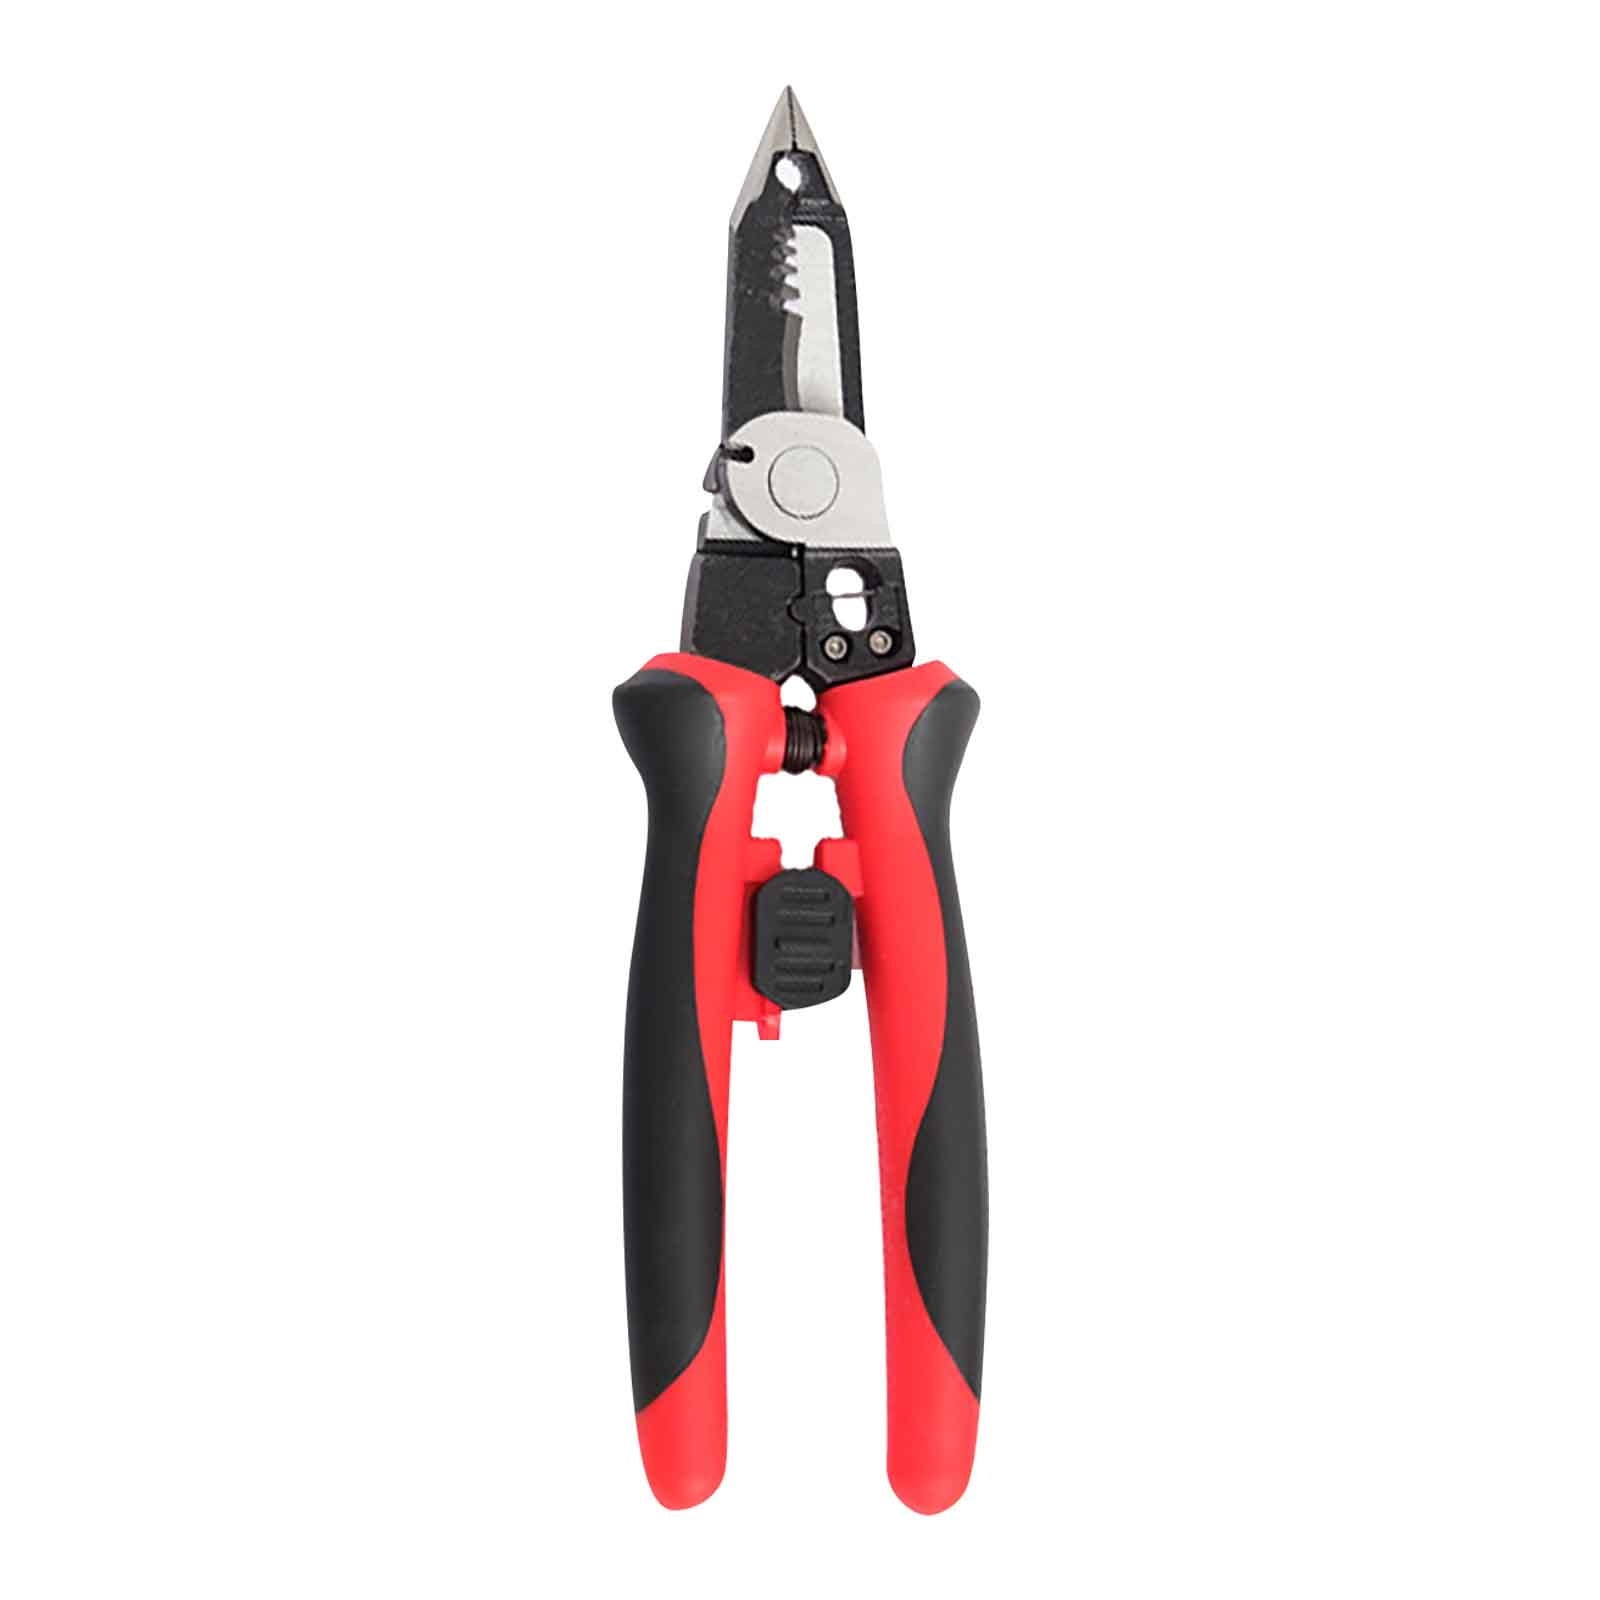 Multifunctional Wire Stripper Seven In One Electrician Manual Tool Crimping Pliers Electrician Pliers Manual Vice -